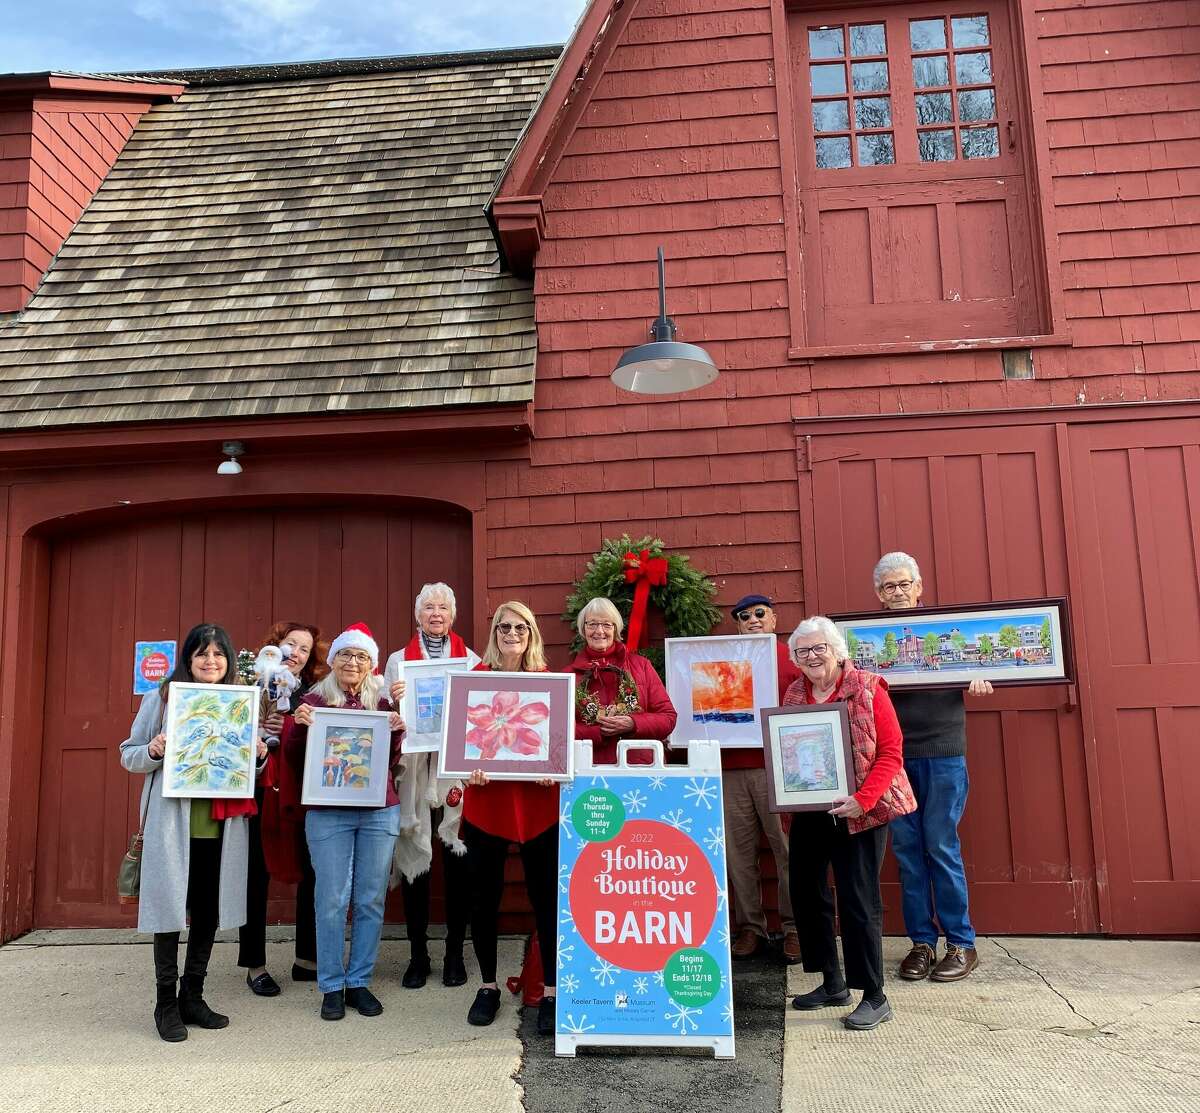 With the holiday season well upon us, Keeler Tavern Museum & History Center's Holiday Boutique in the Barn has been doing brisk business. Located in the historic red carriage barn, the Holiday Boutique is open Thursdays to Sundays from 11 a.m. to 4 p.m. through Dec. 18.